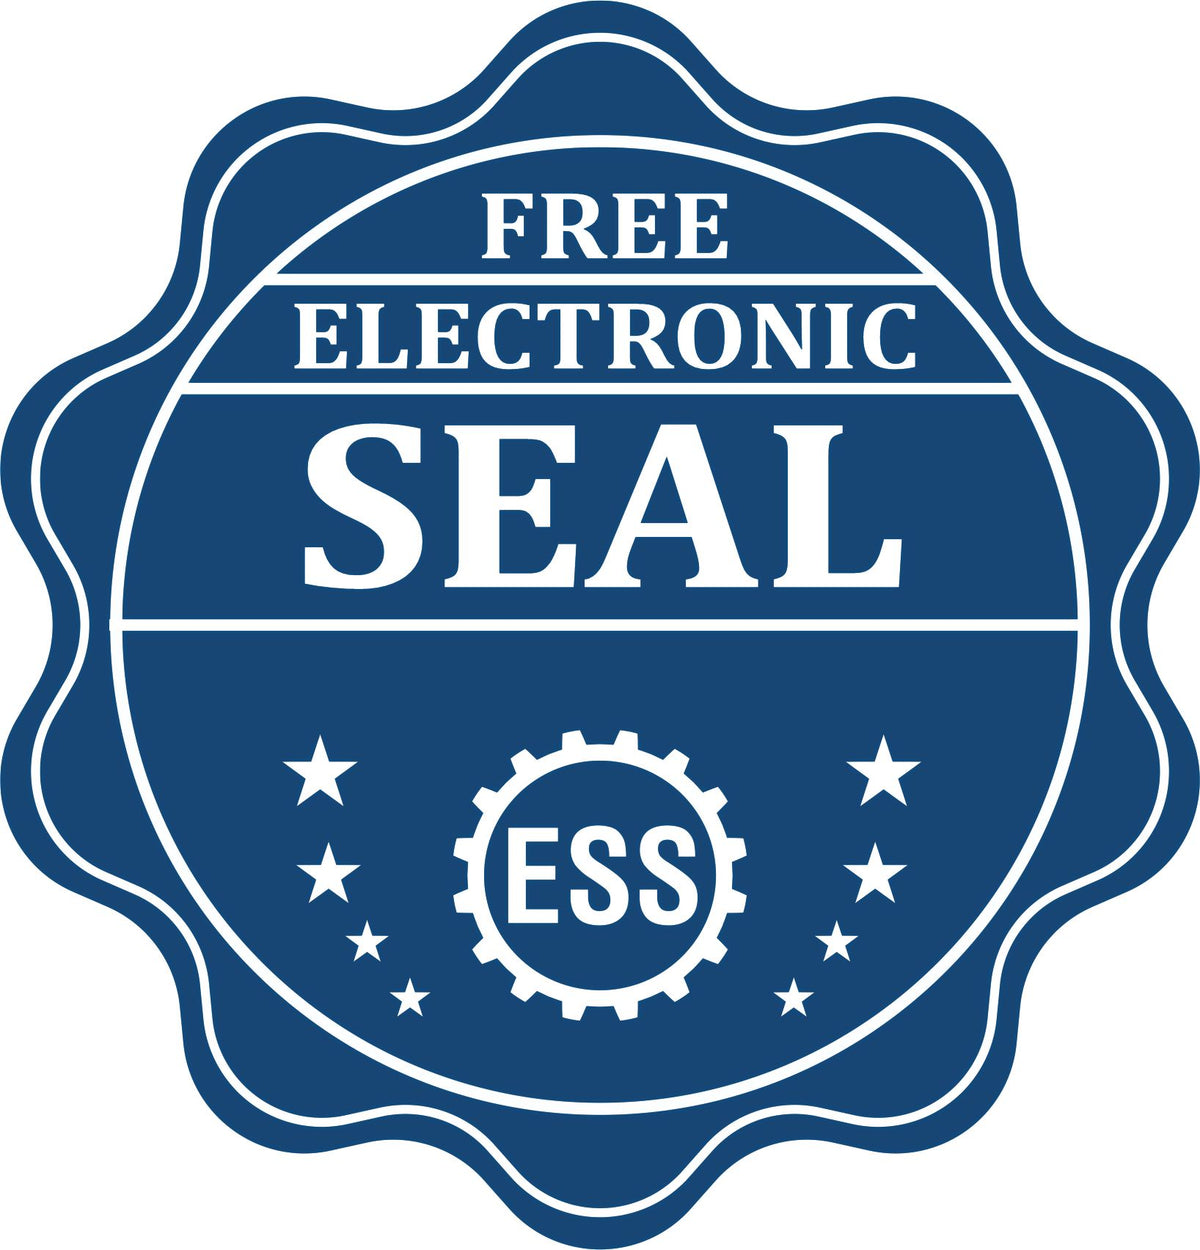 A badge showing a free electronic seal for the Heavy Duty Cast Iron Idaho Architect Embosser with stars and the ESS gear on the emblem.